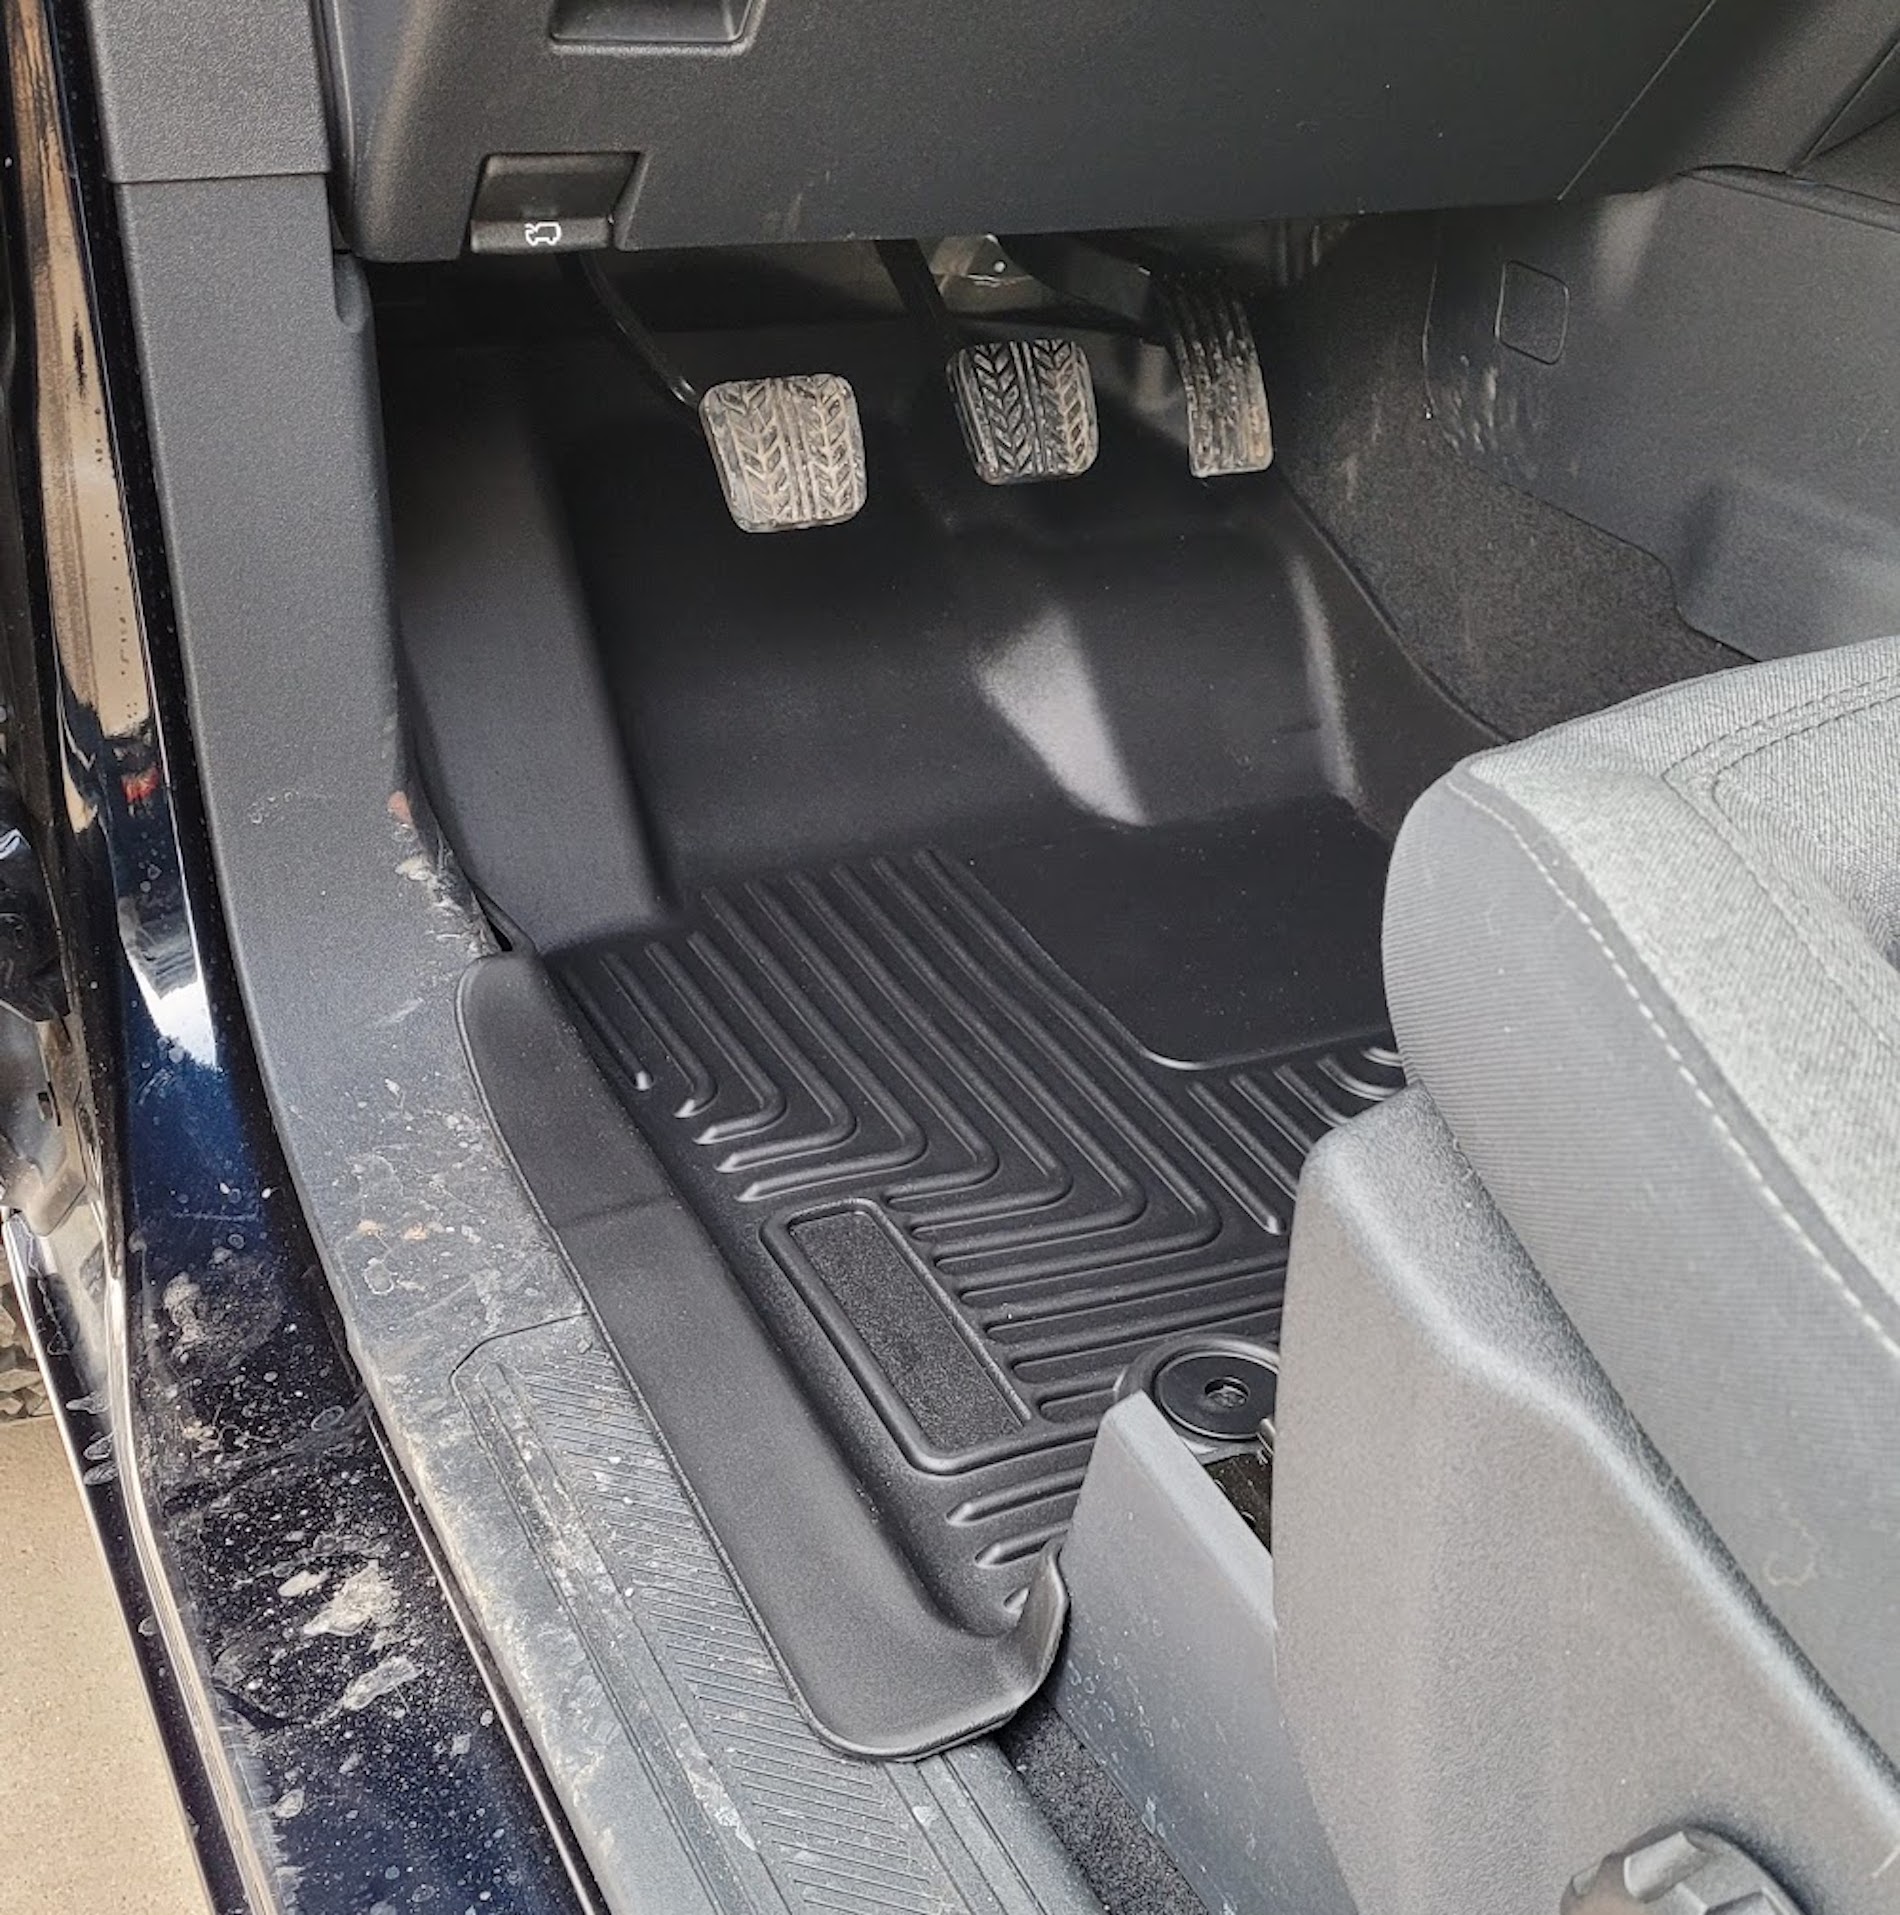 Ford Bronco Husky Floor Liners Mats vs Ford Factory Floor Liners - pics & review 20220116_153737